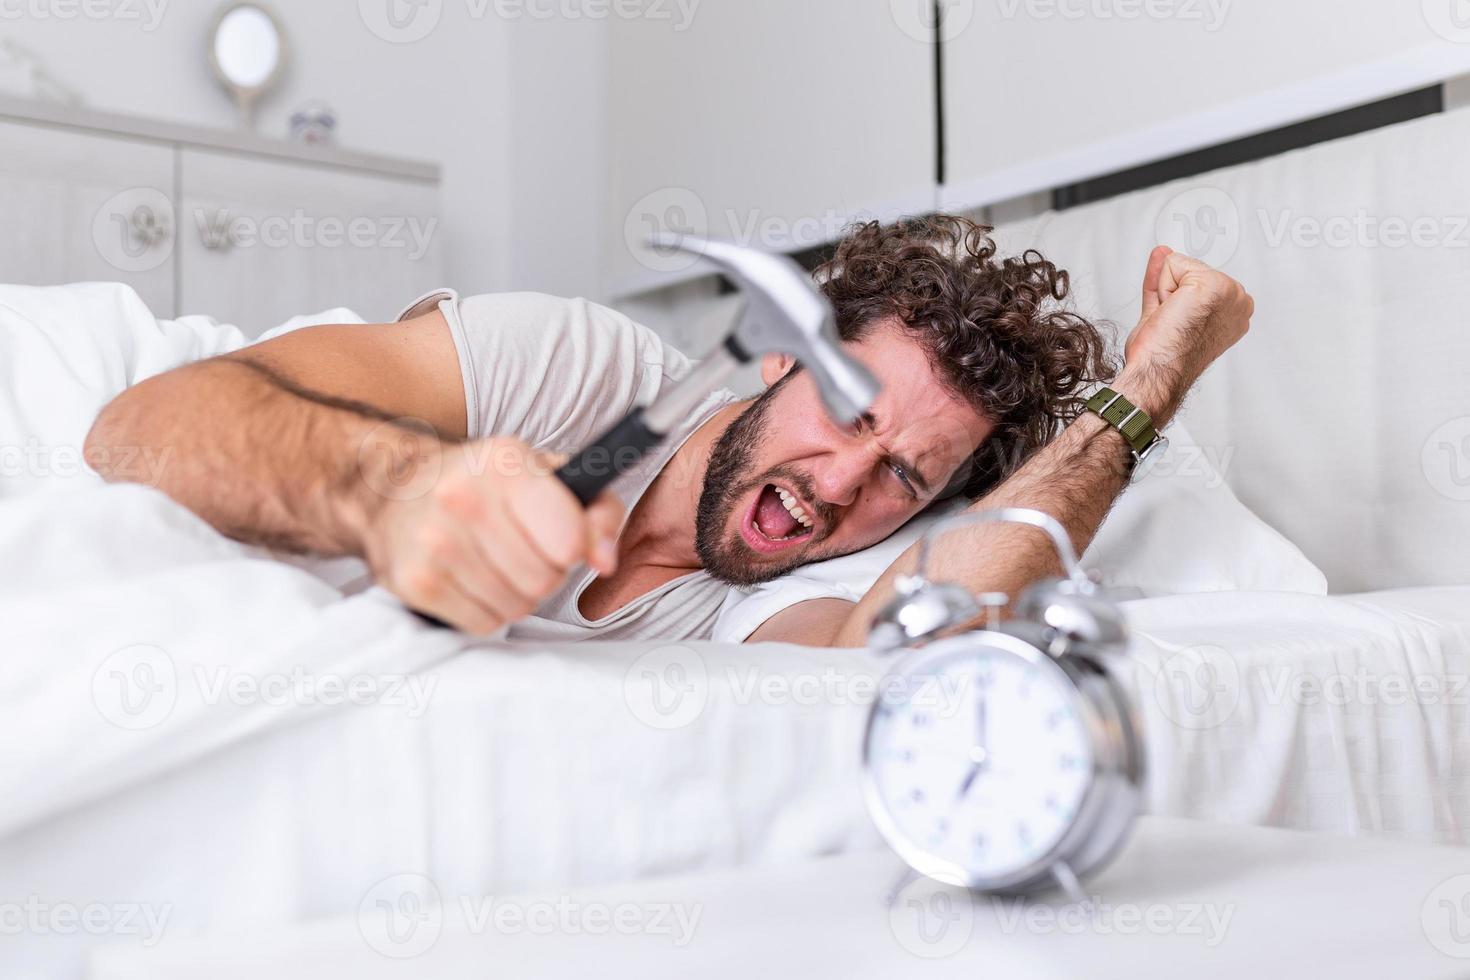 Young man tries to break the alarm clock with hammer, Destroy the Clock. Man lying in bed turning off an alarm clock with hammer in the morning at 7am. photo